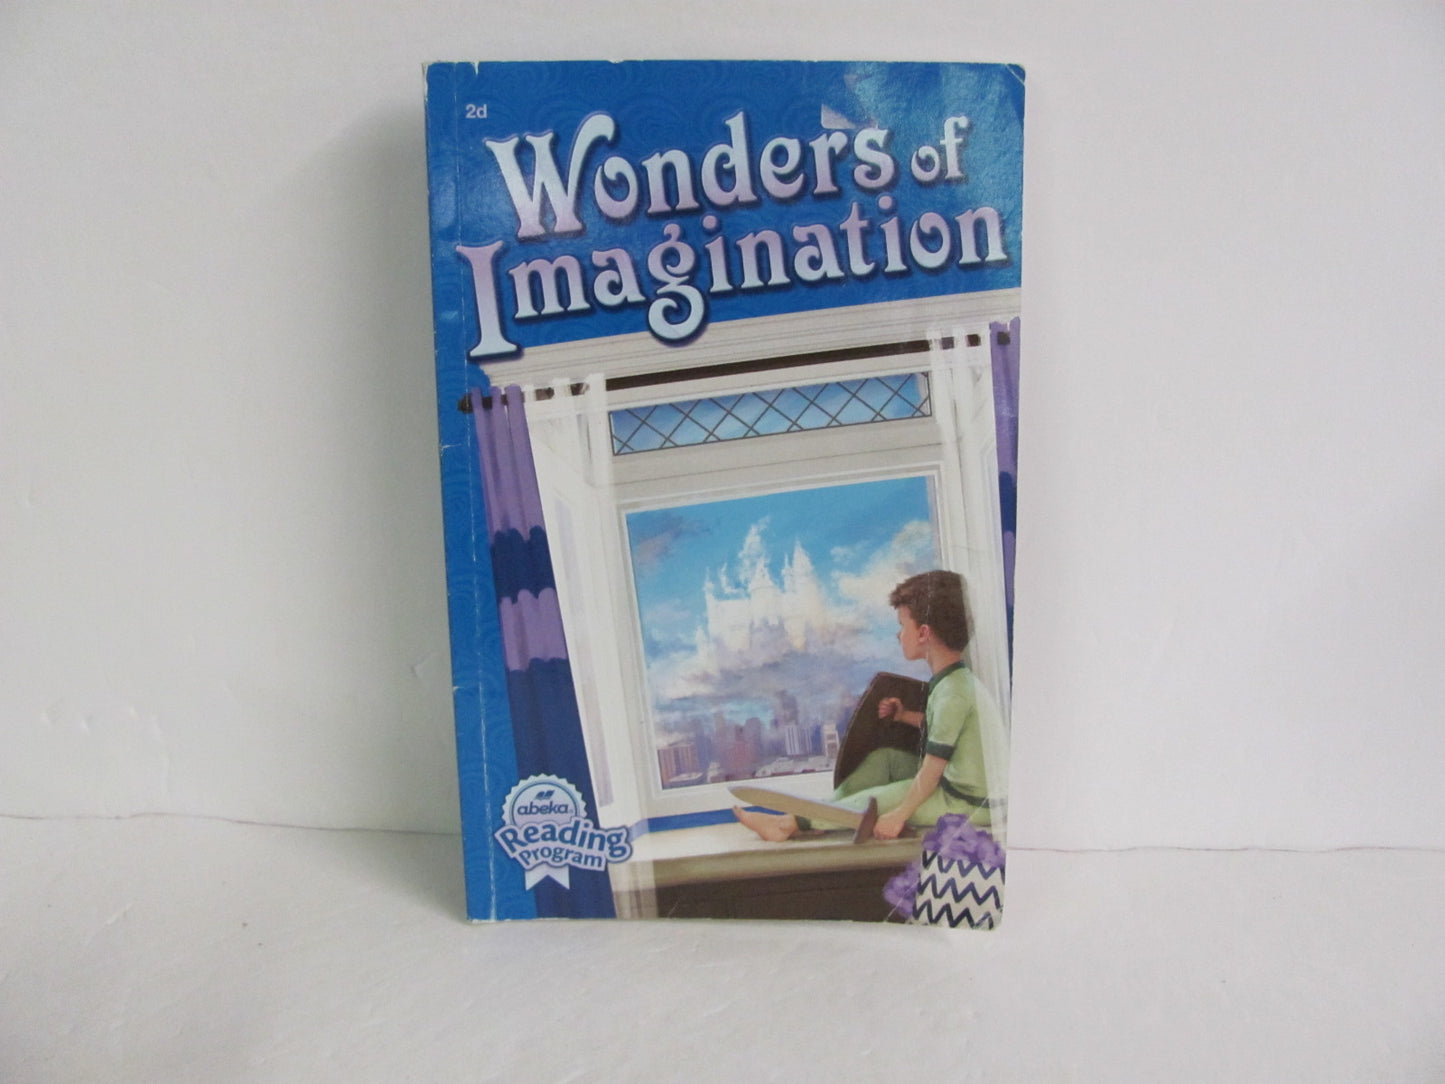 Wonders of Imagination Abeka Student Book Pre-Owned 2nd Grade Reading Textbooks